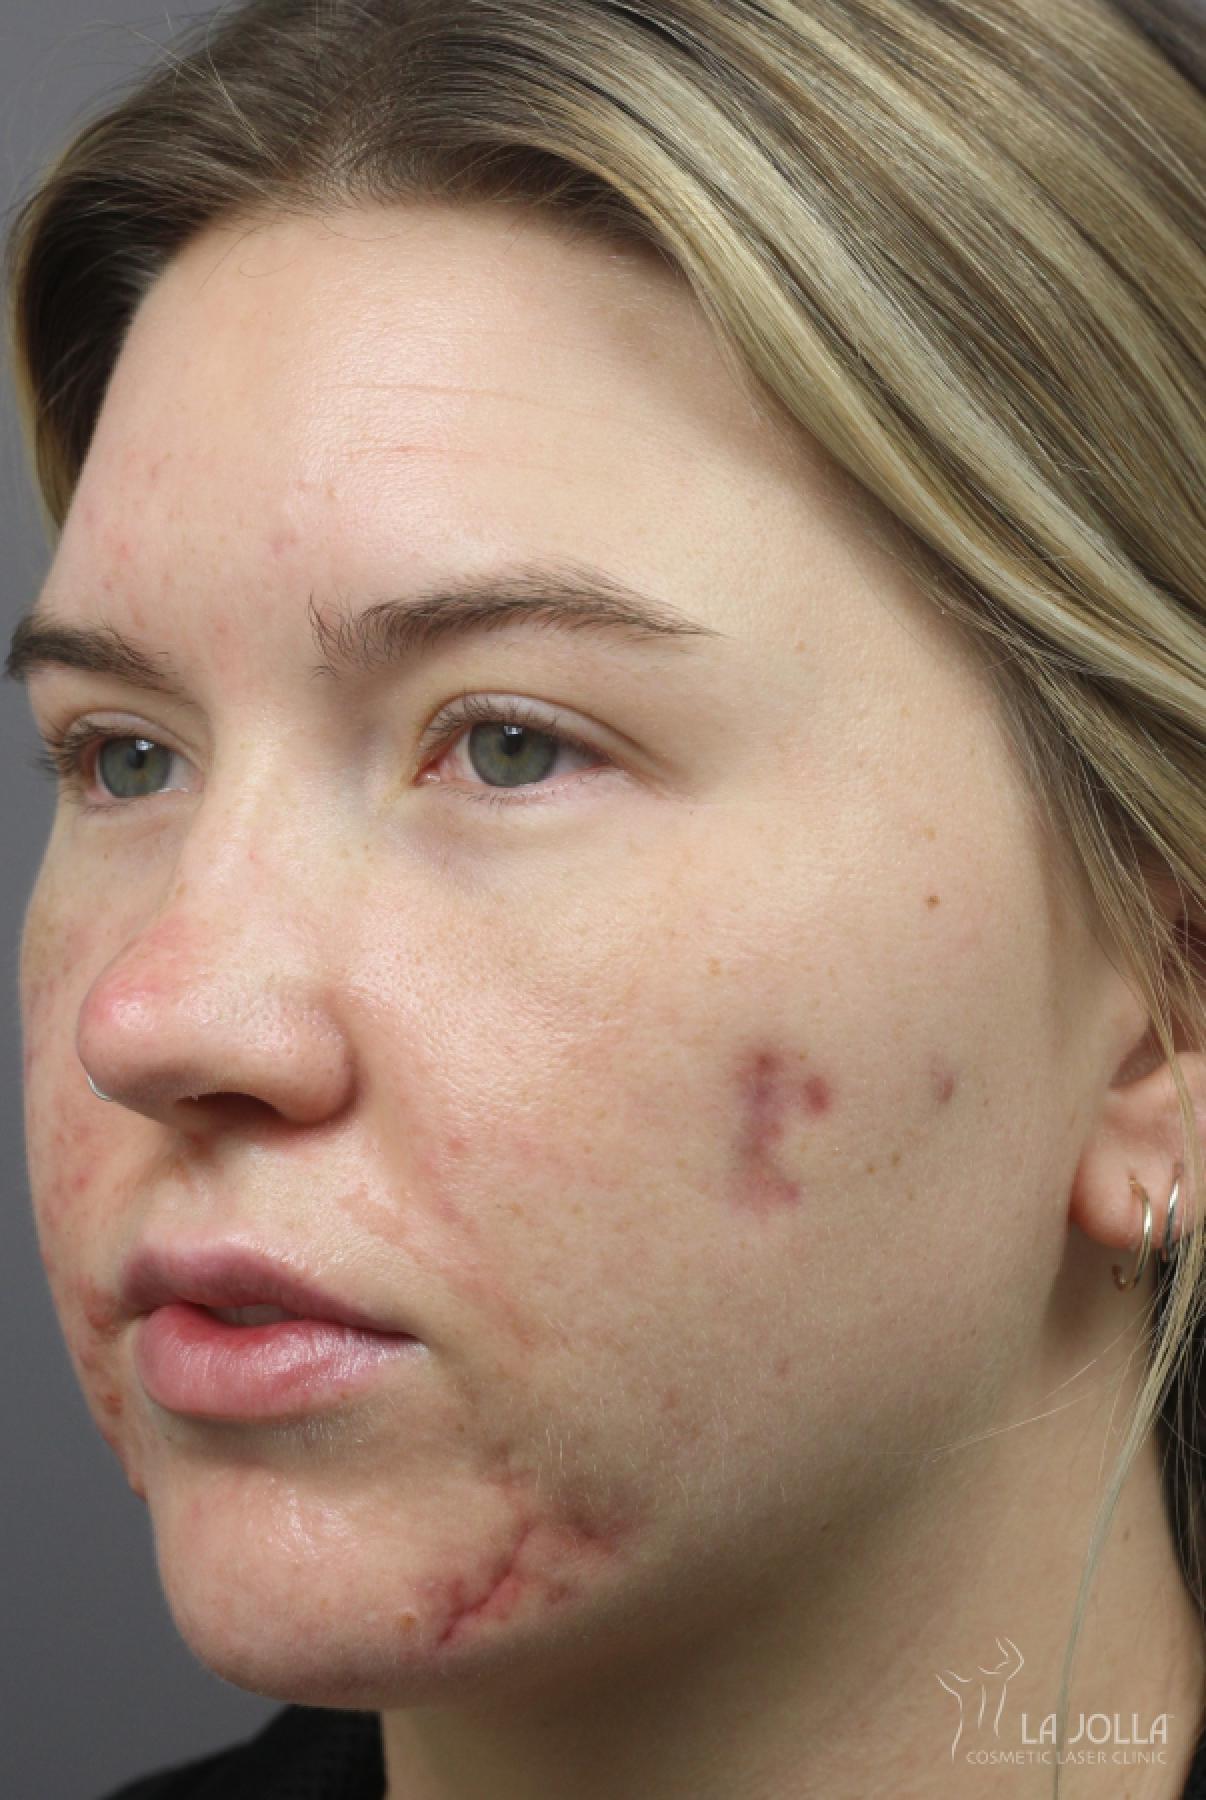 Acne Scars: Patient 2 - Before and After 3